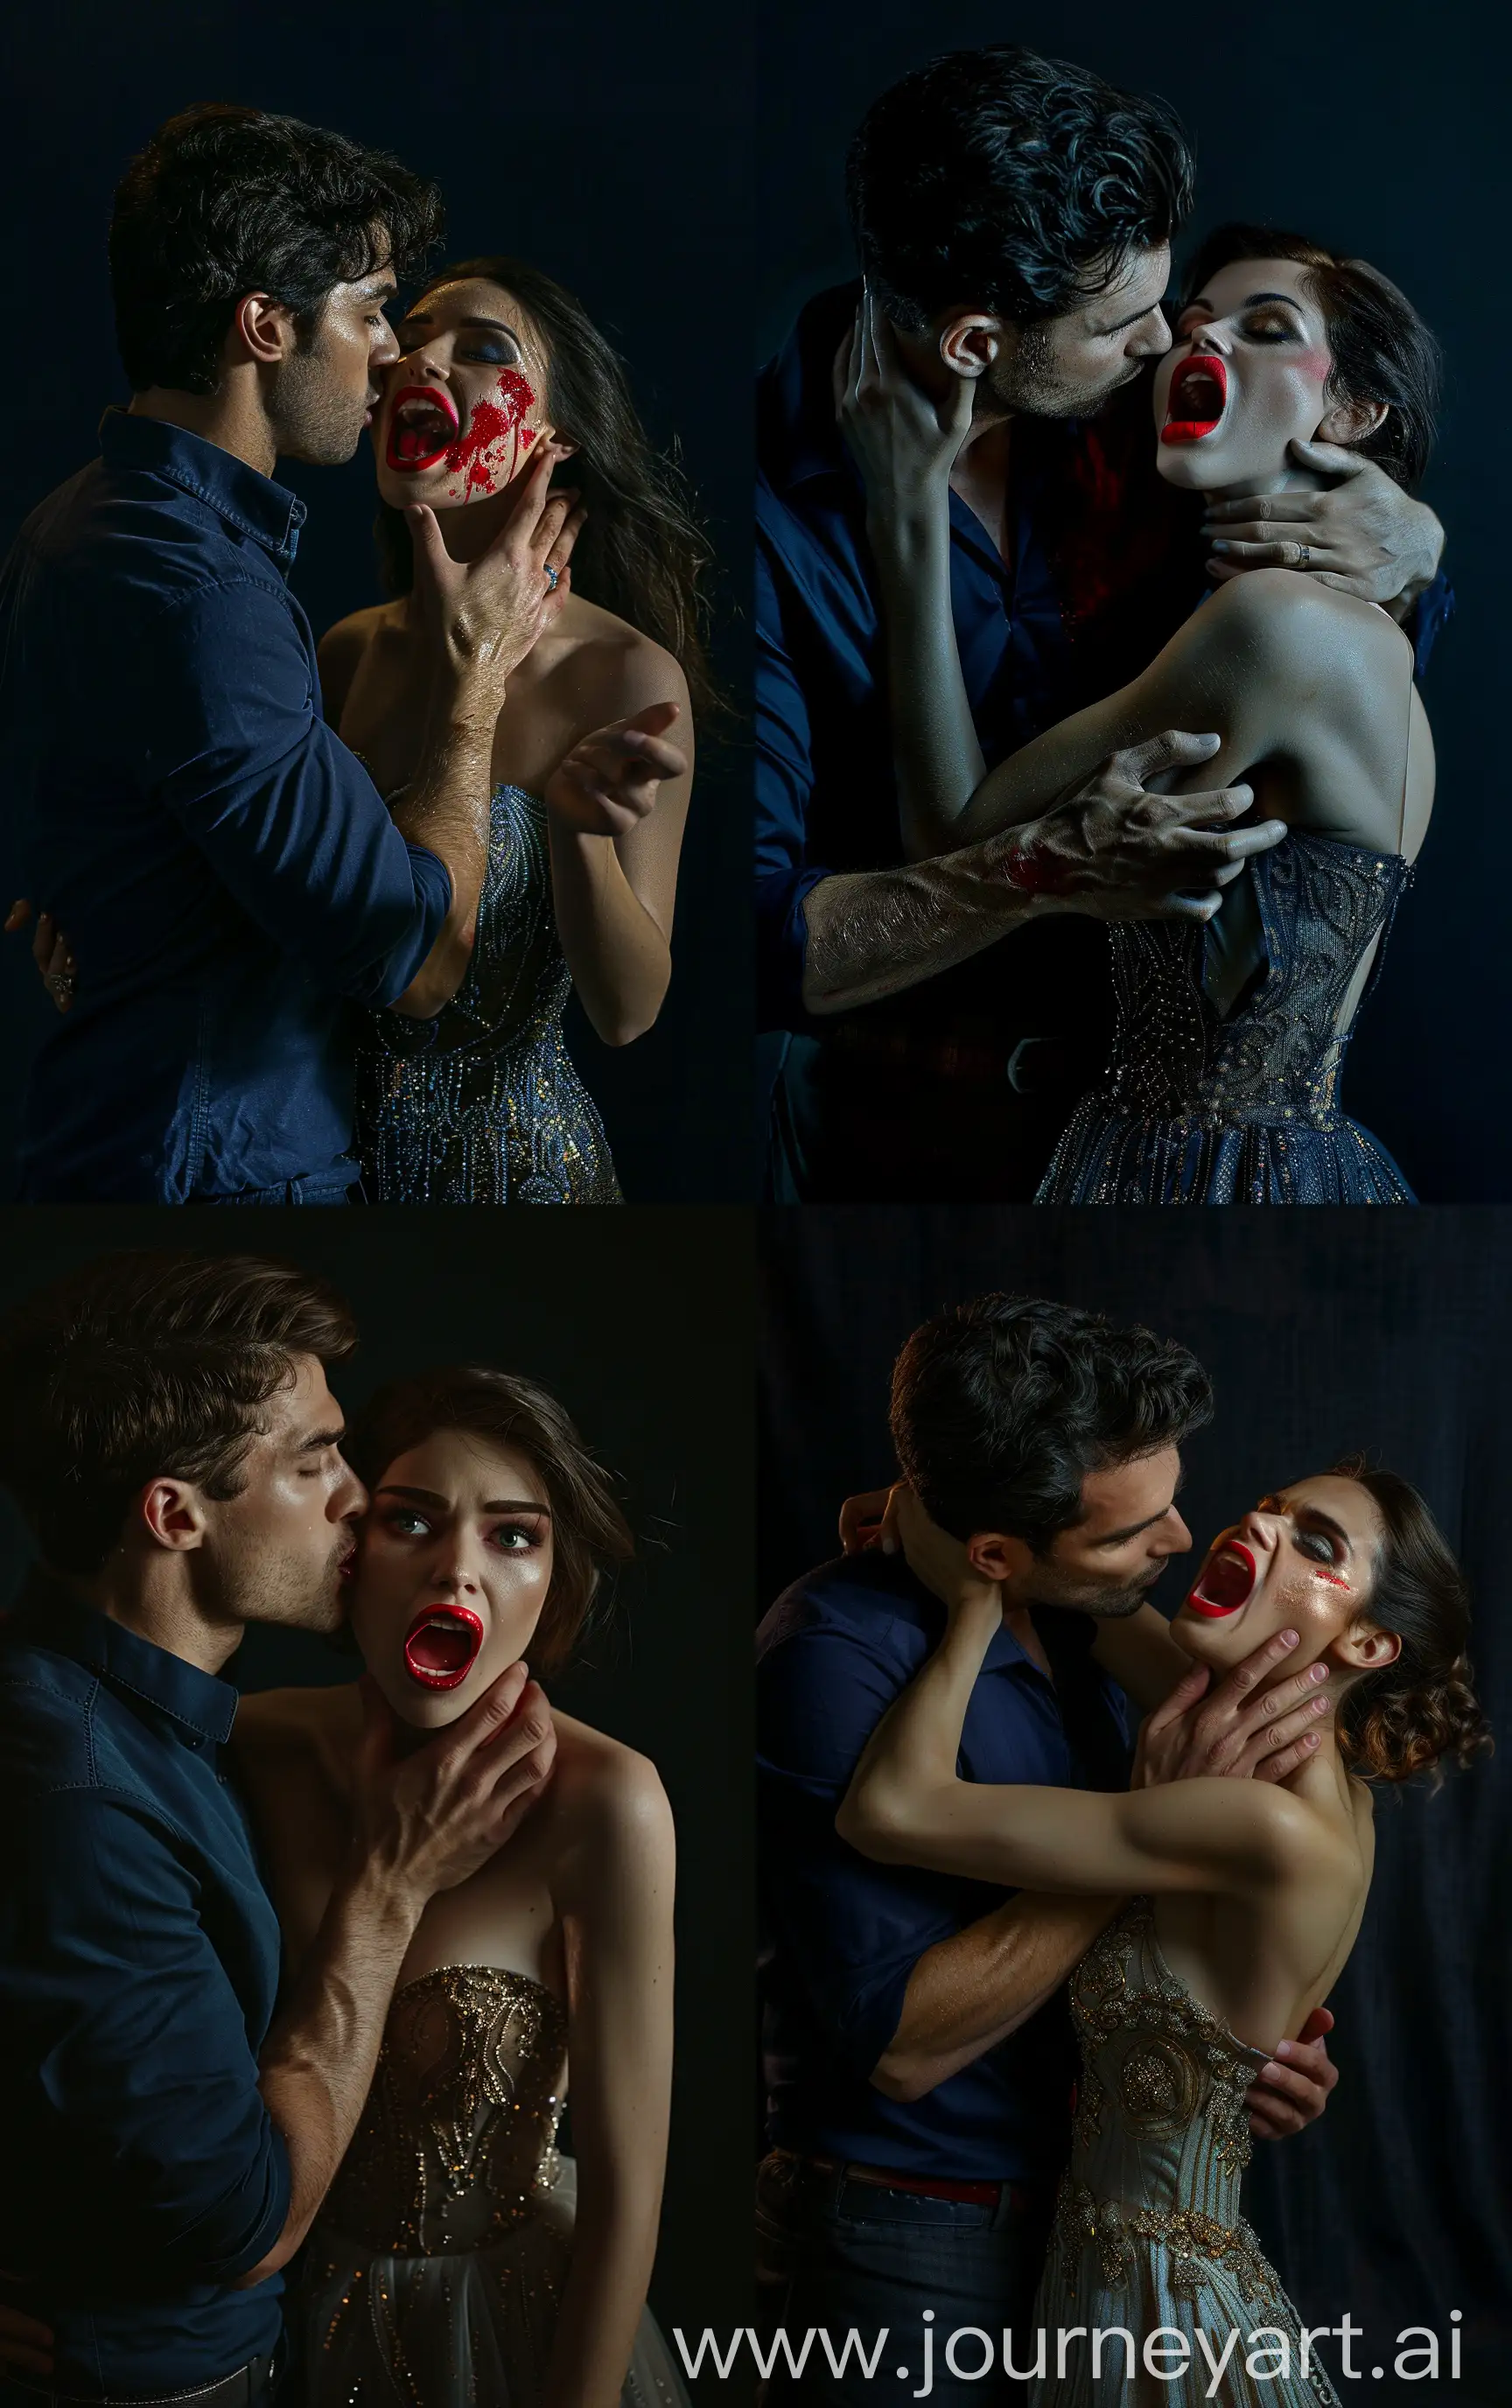 Passionate-Kiss-Man-Embracing-Woman-in-Elegant-Attire-on-Dark-Cinematic-Background